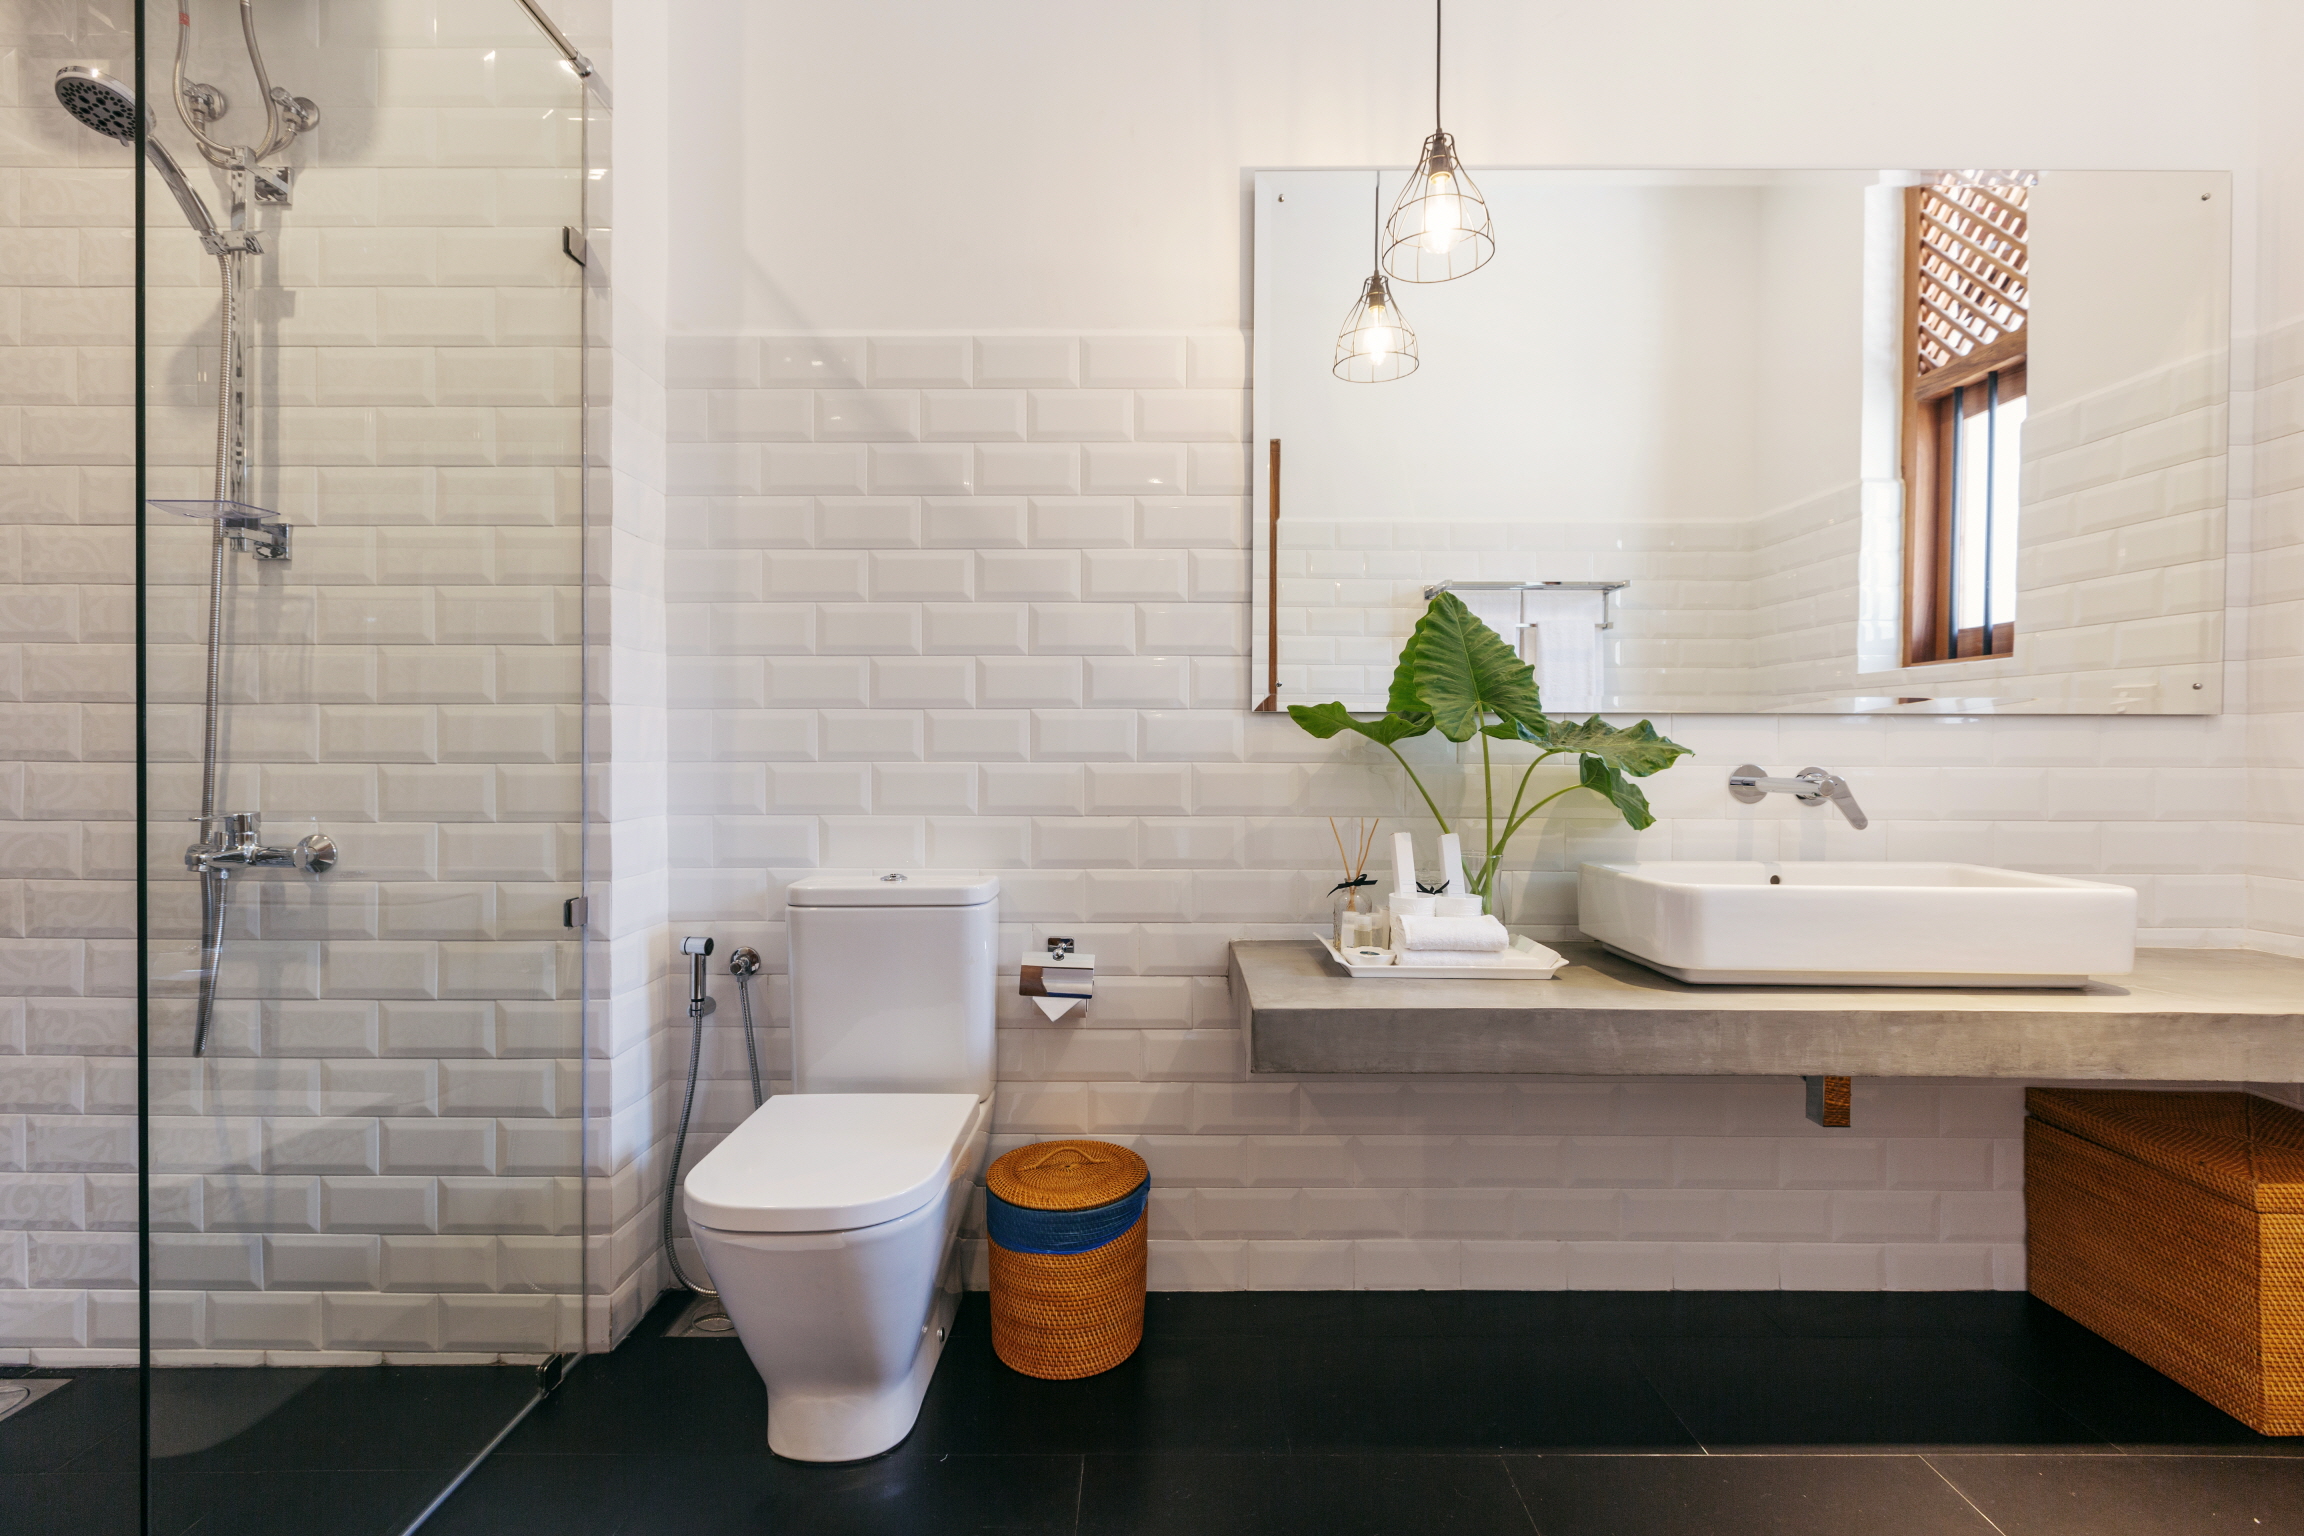 Reduce the complexity of your renovation and create a clean look by placing the sink and toilet on the same wall.